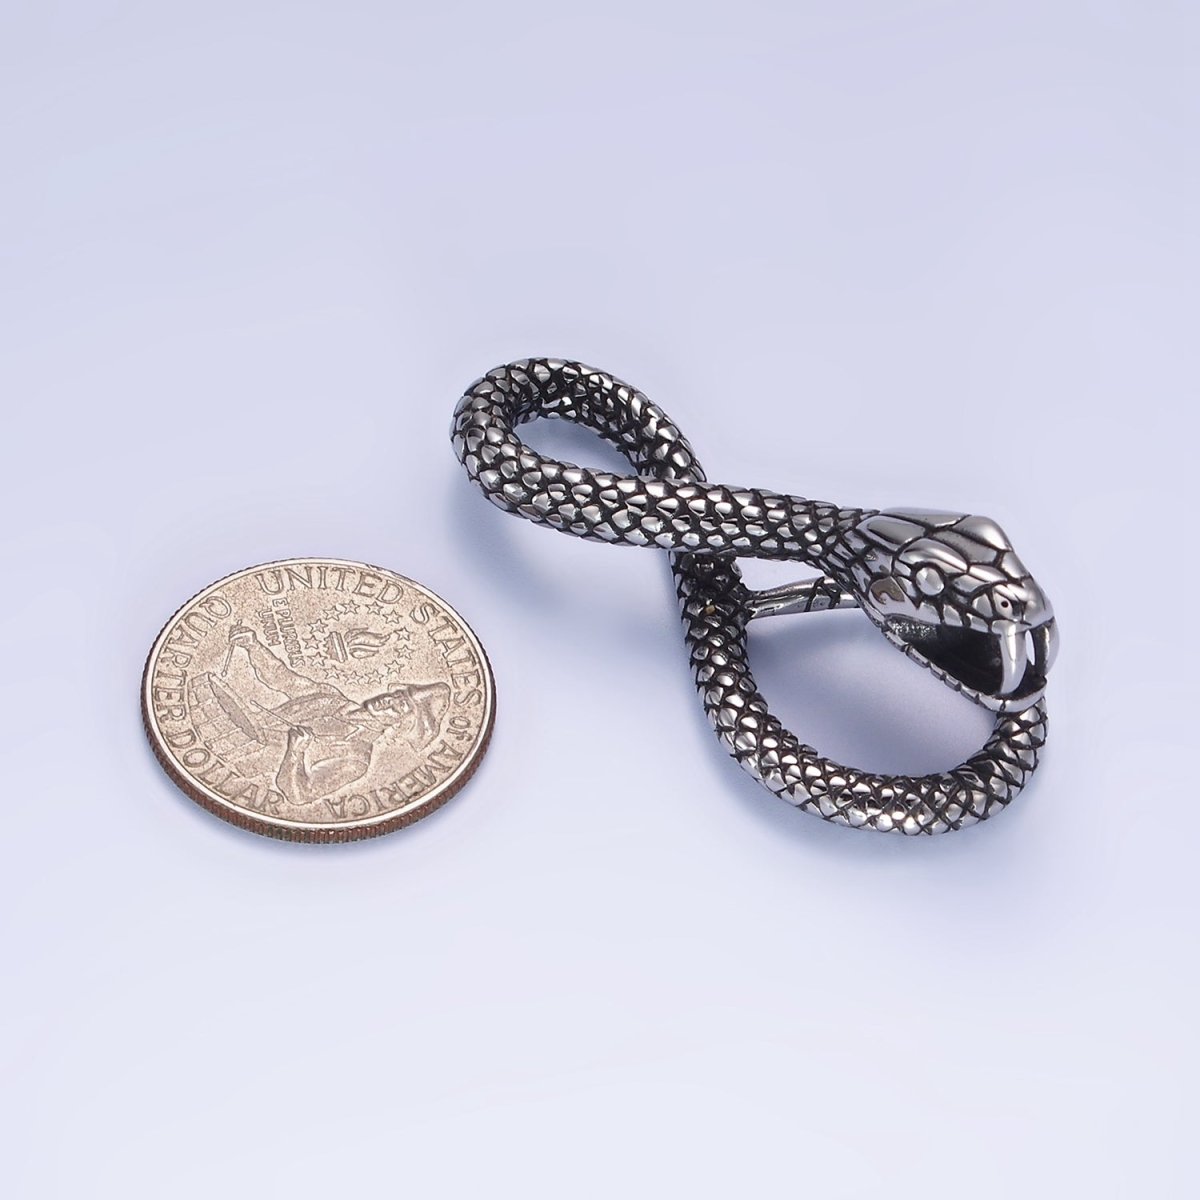 Stainless Steel 50mm Scale-Textured Leaping Snake Serpent Animal Infinity Pendant | P1417 - DLUXCA